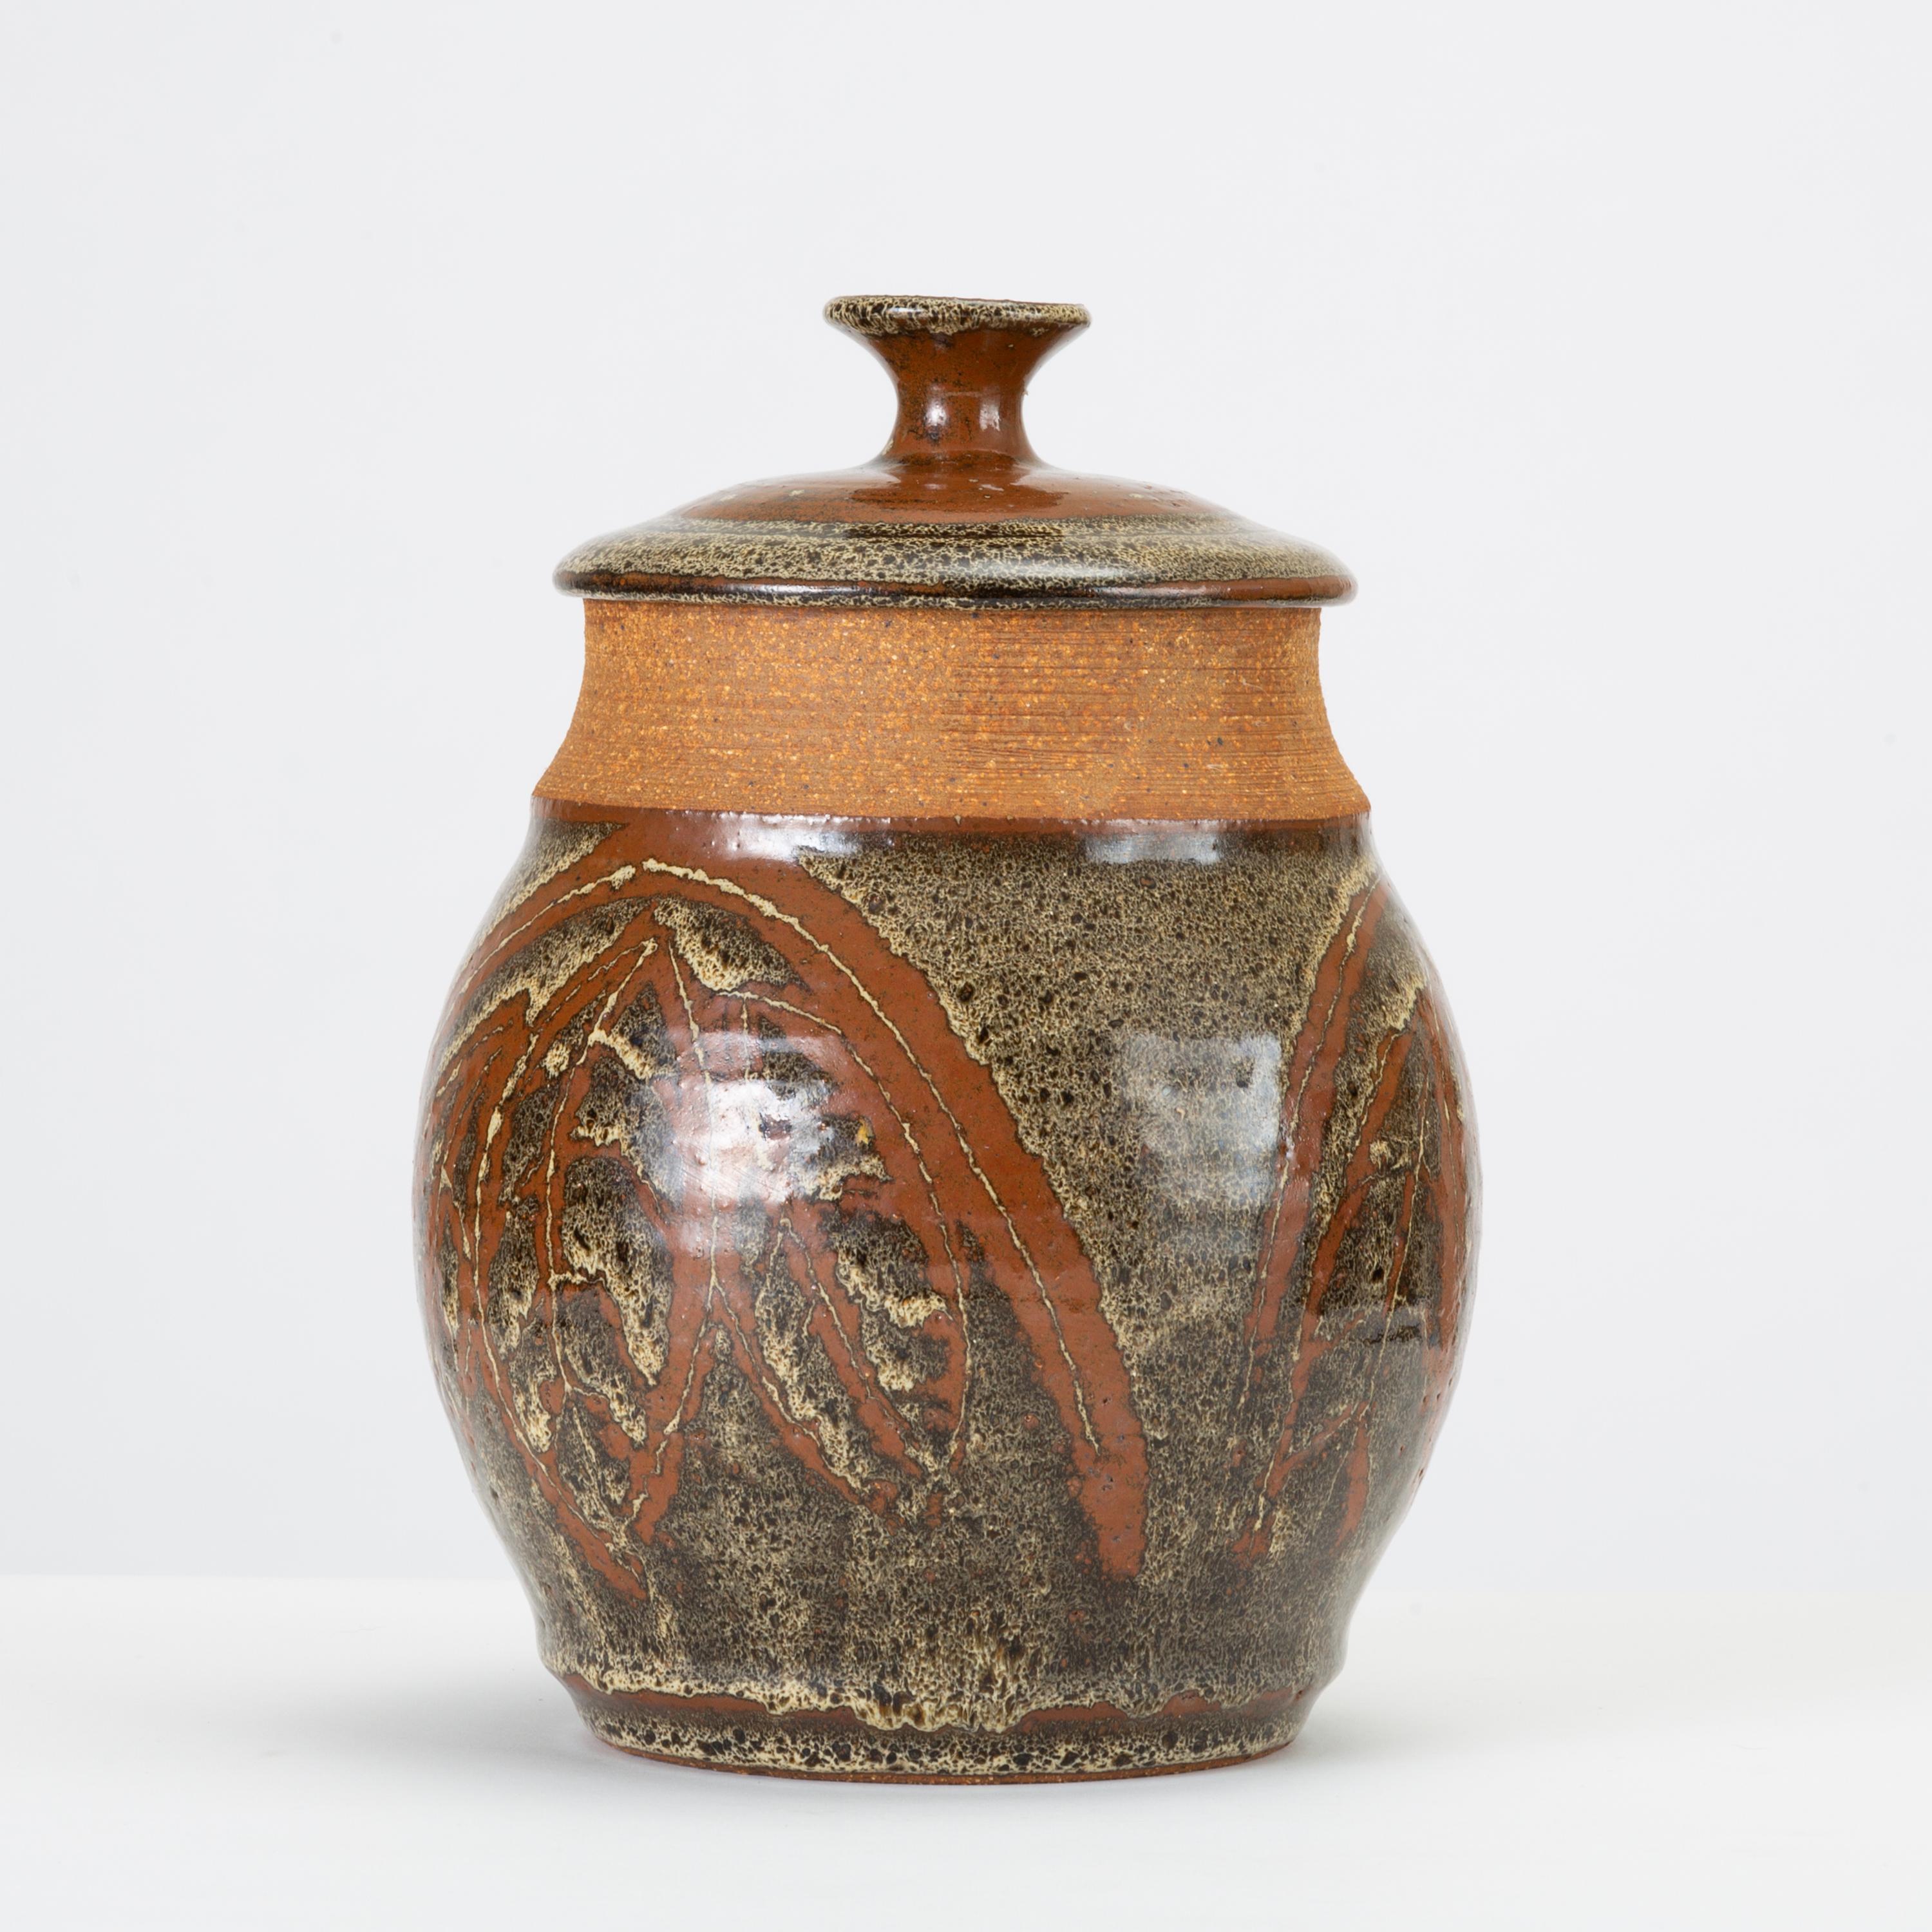 American California Modern Studio Pottery Urn with Leaf Pattern by Don Jennings